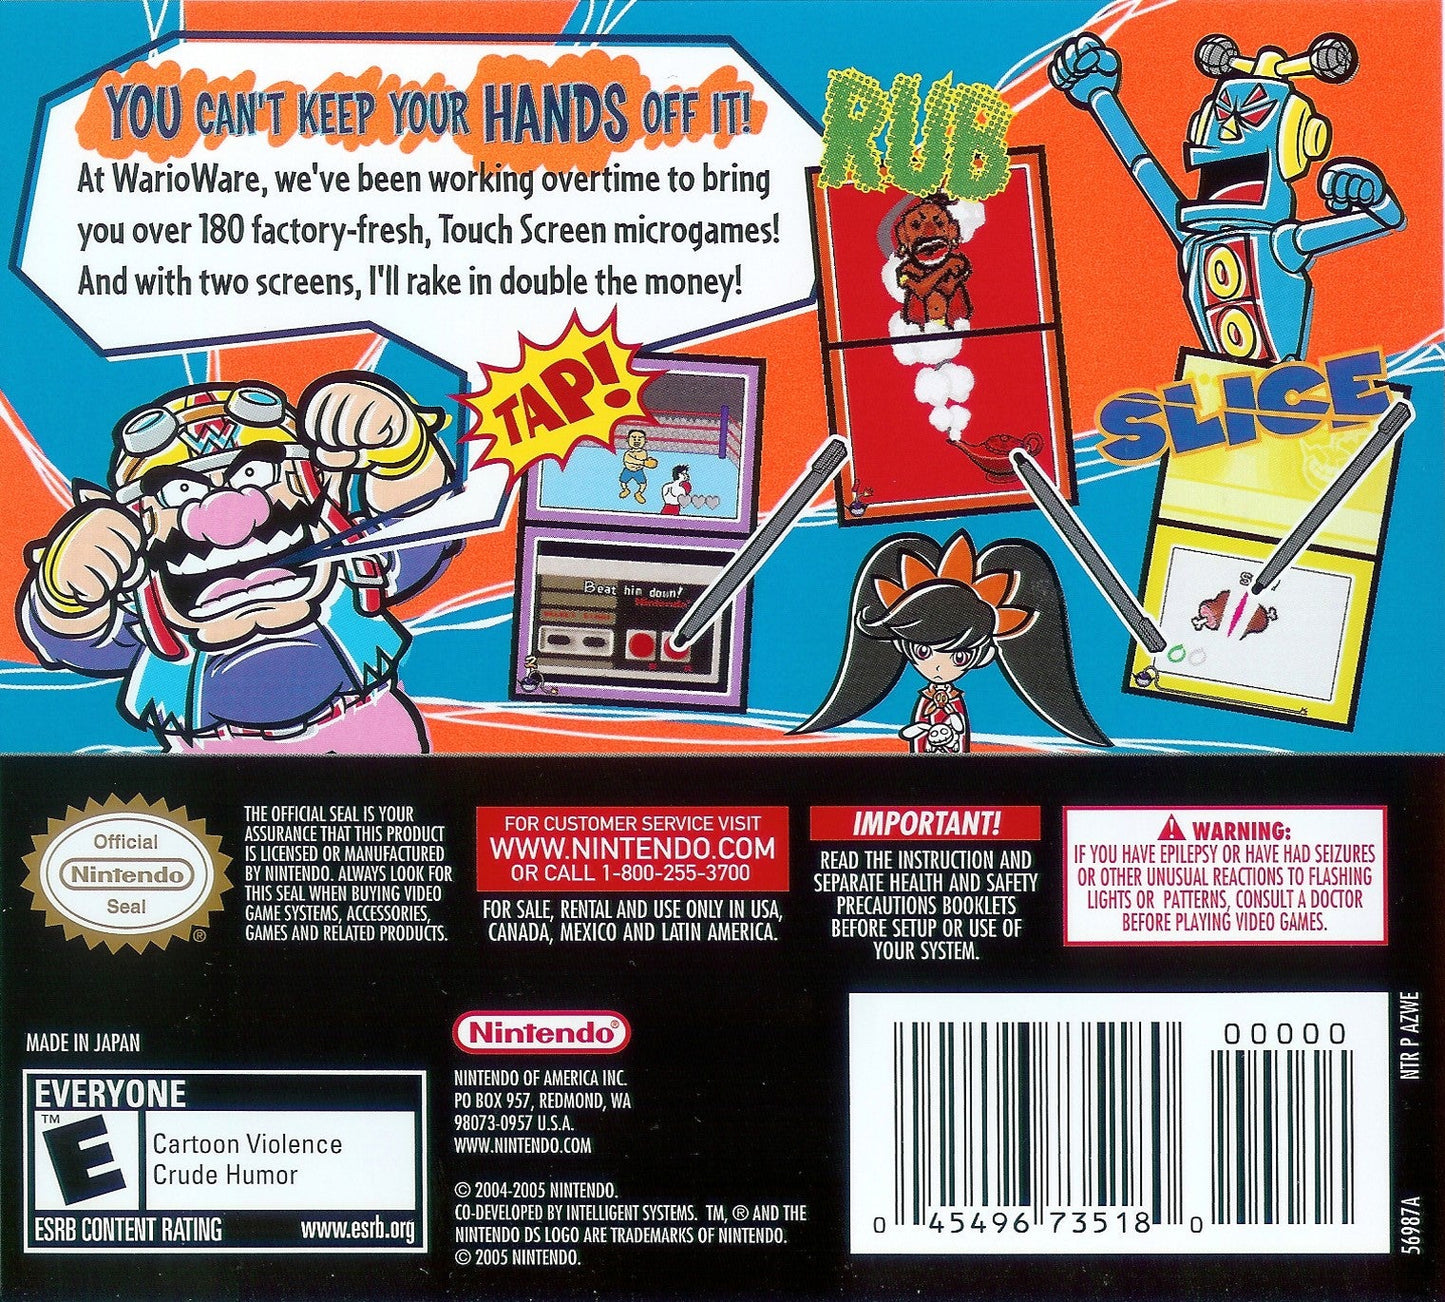 Warioware: Touched!